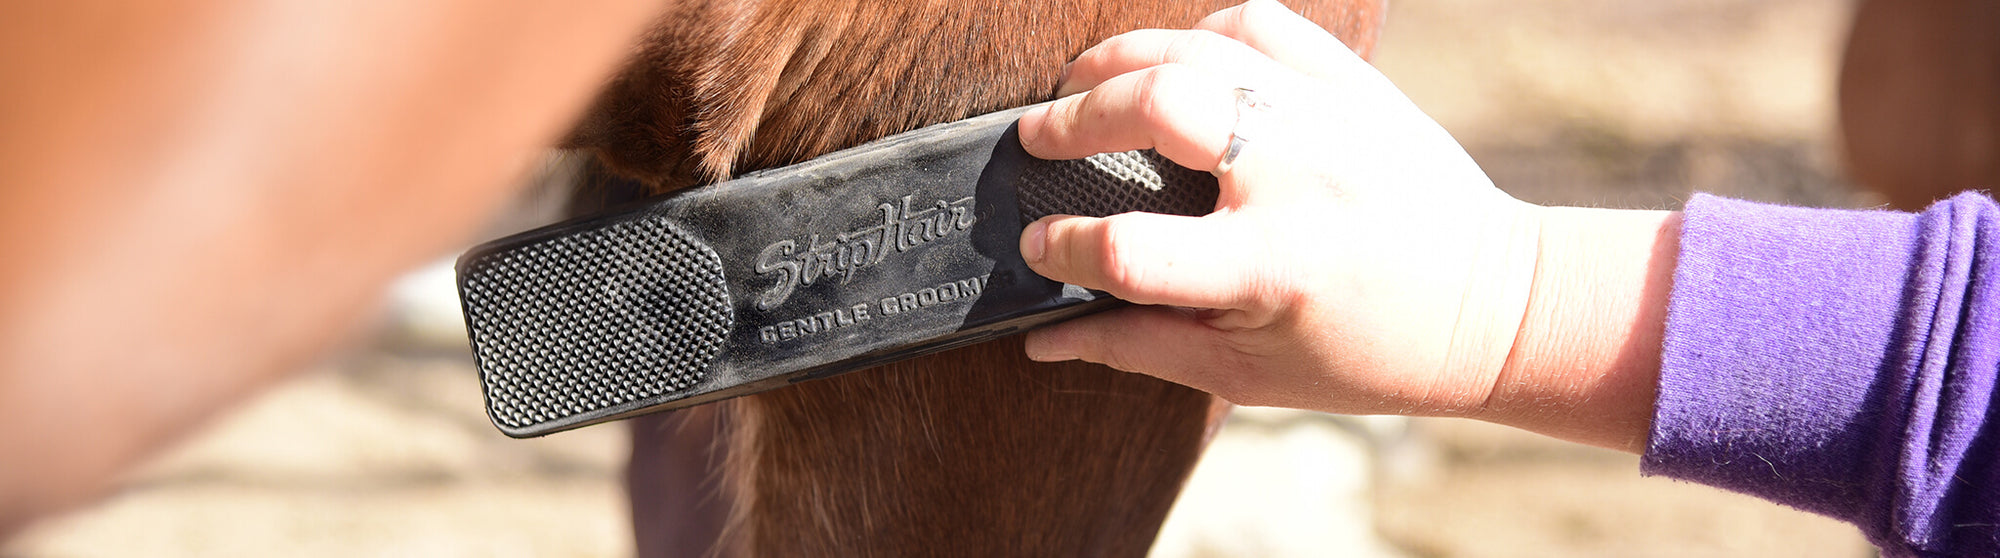 What Customers Have to Say About The StripHair Gentle Groomer for Horses